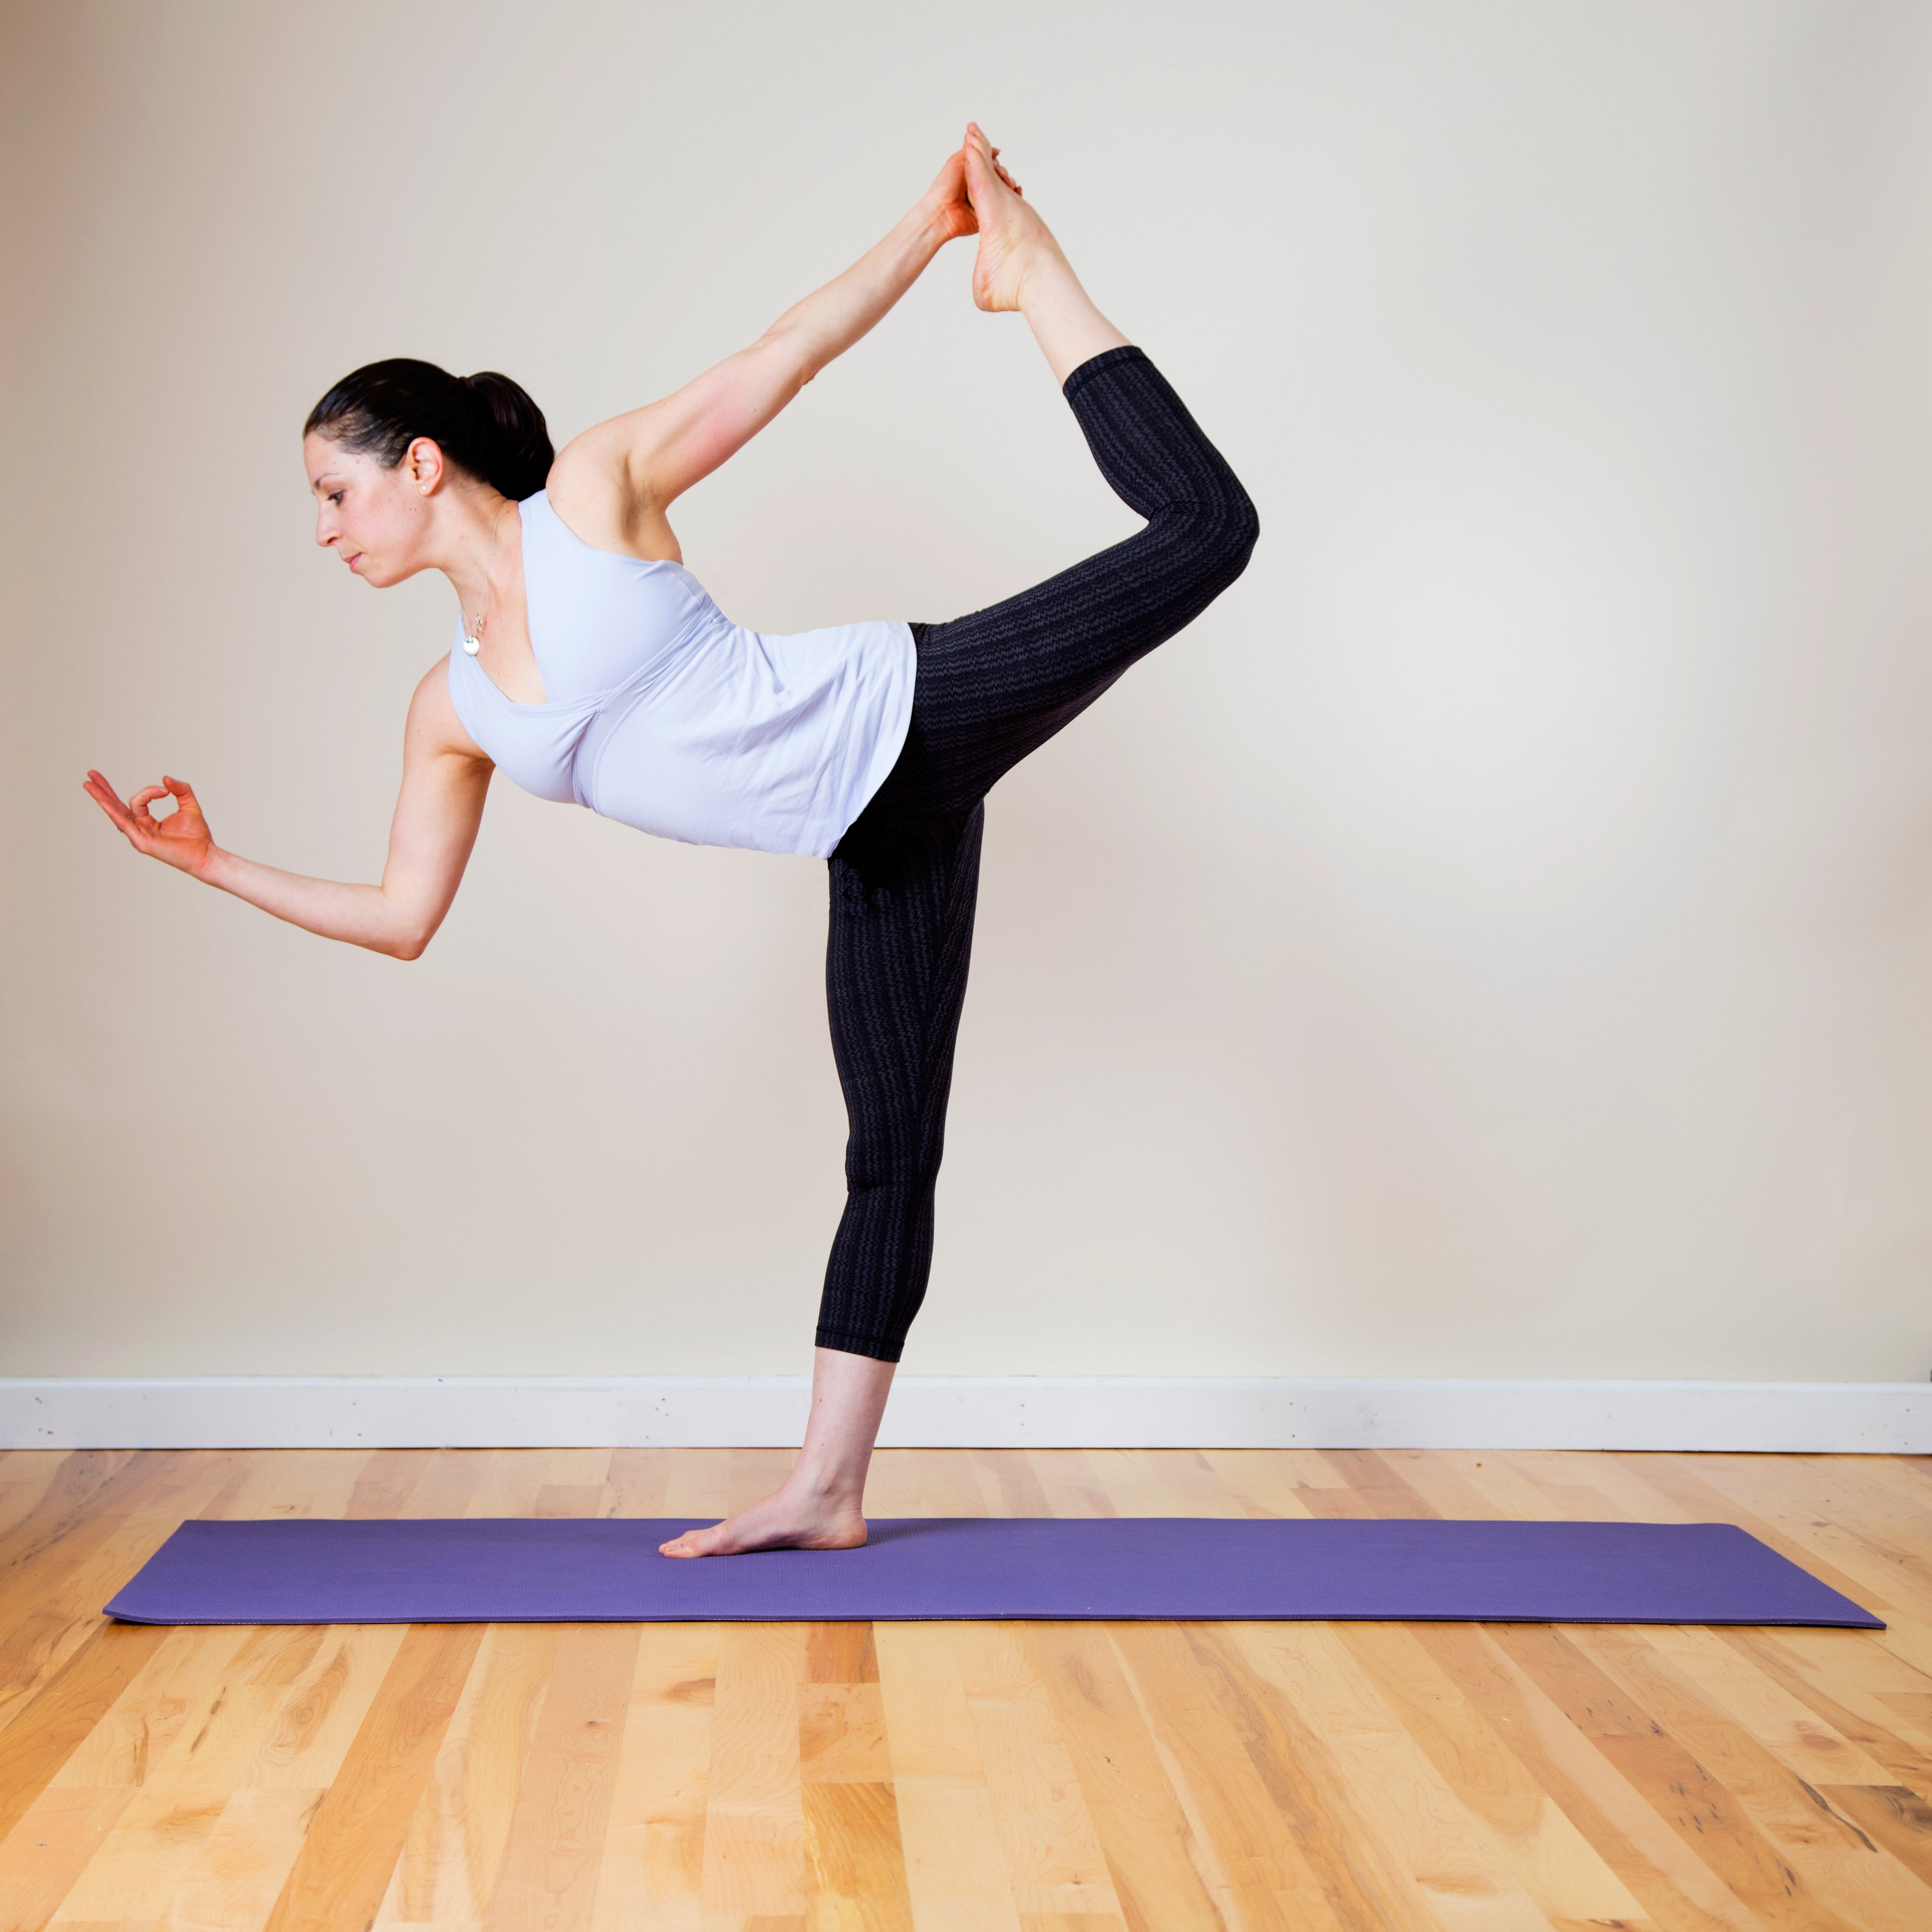 Try Out These Five Yoga Poses Without Leaving Your Office Desk